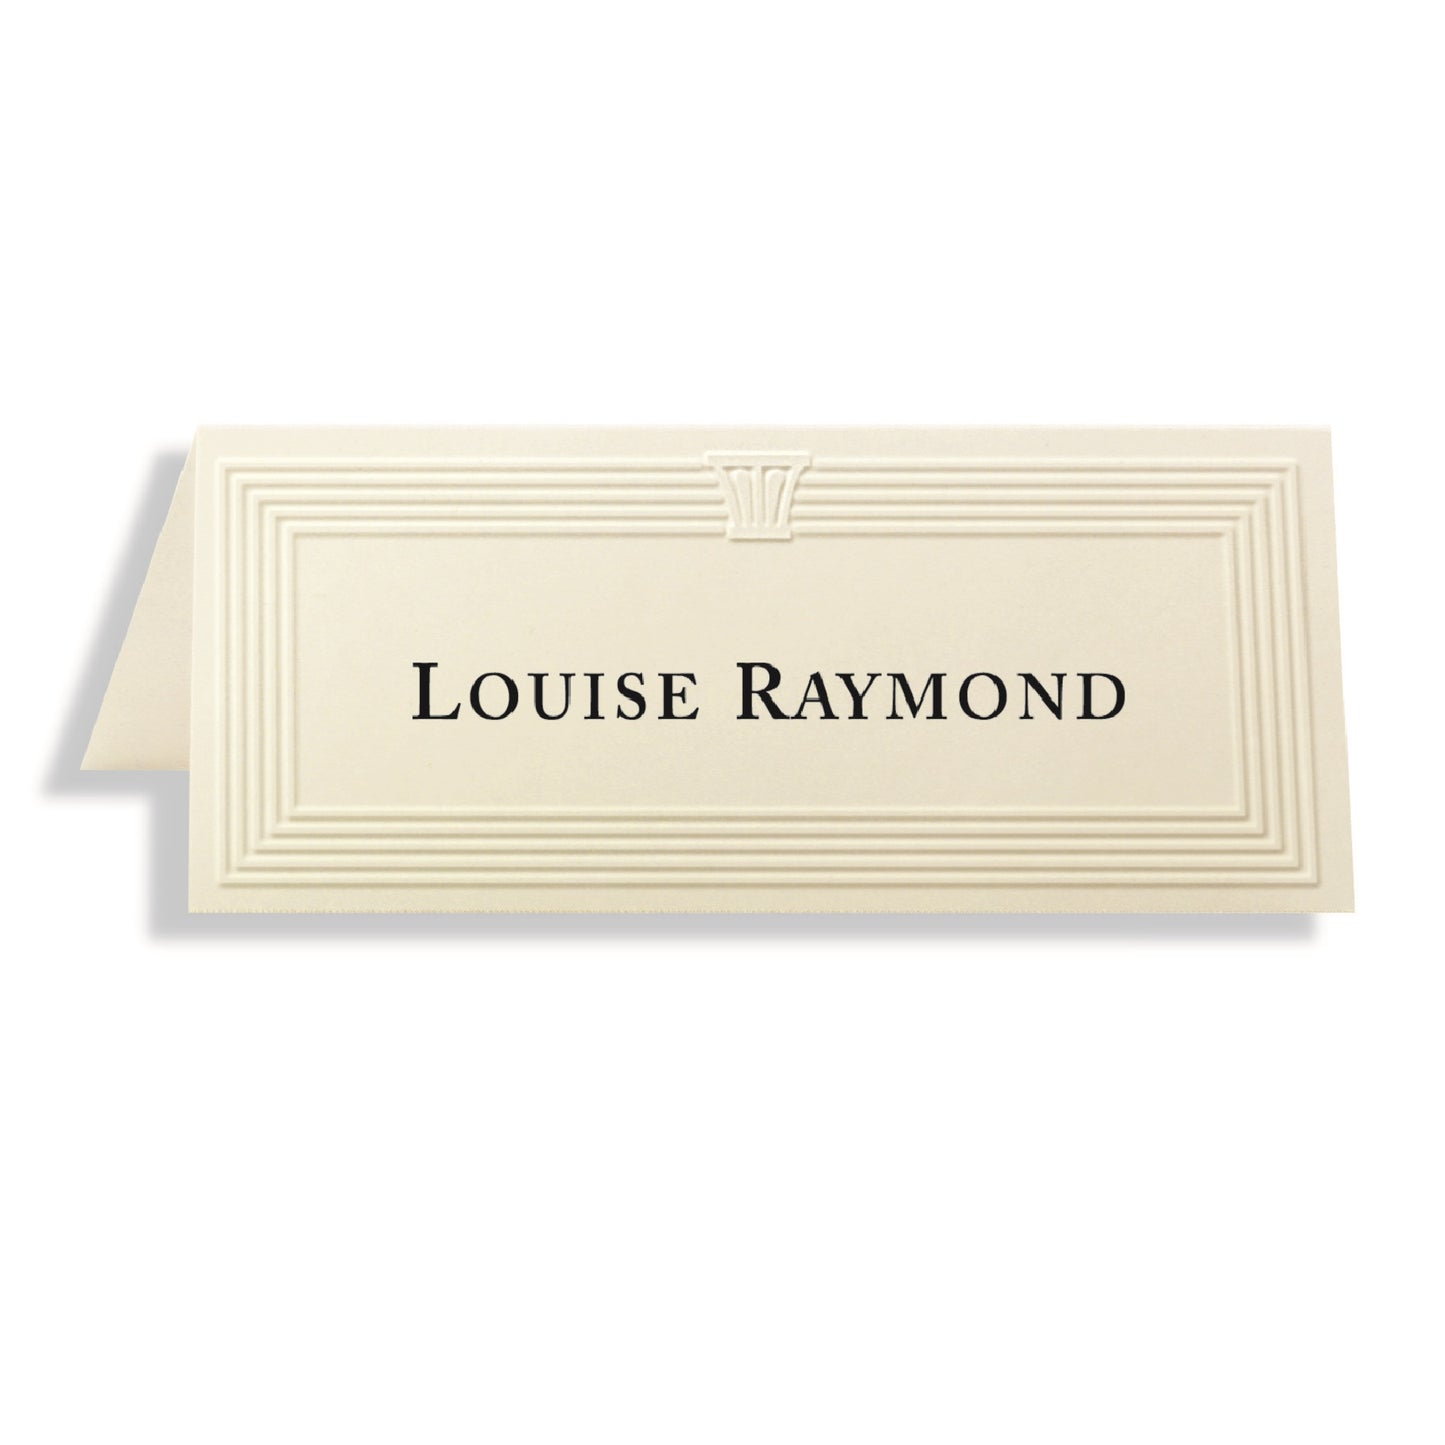 St. James® Overtures® Capital Embossed Place Cards, Ivory, Fold to 1¾ x 4¼", Pack of 1500